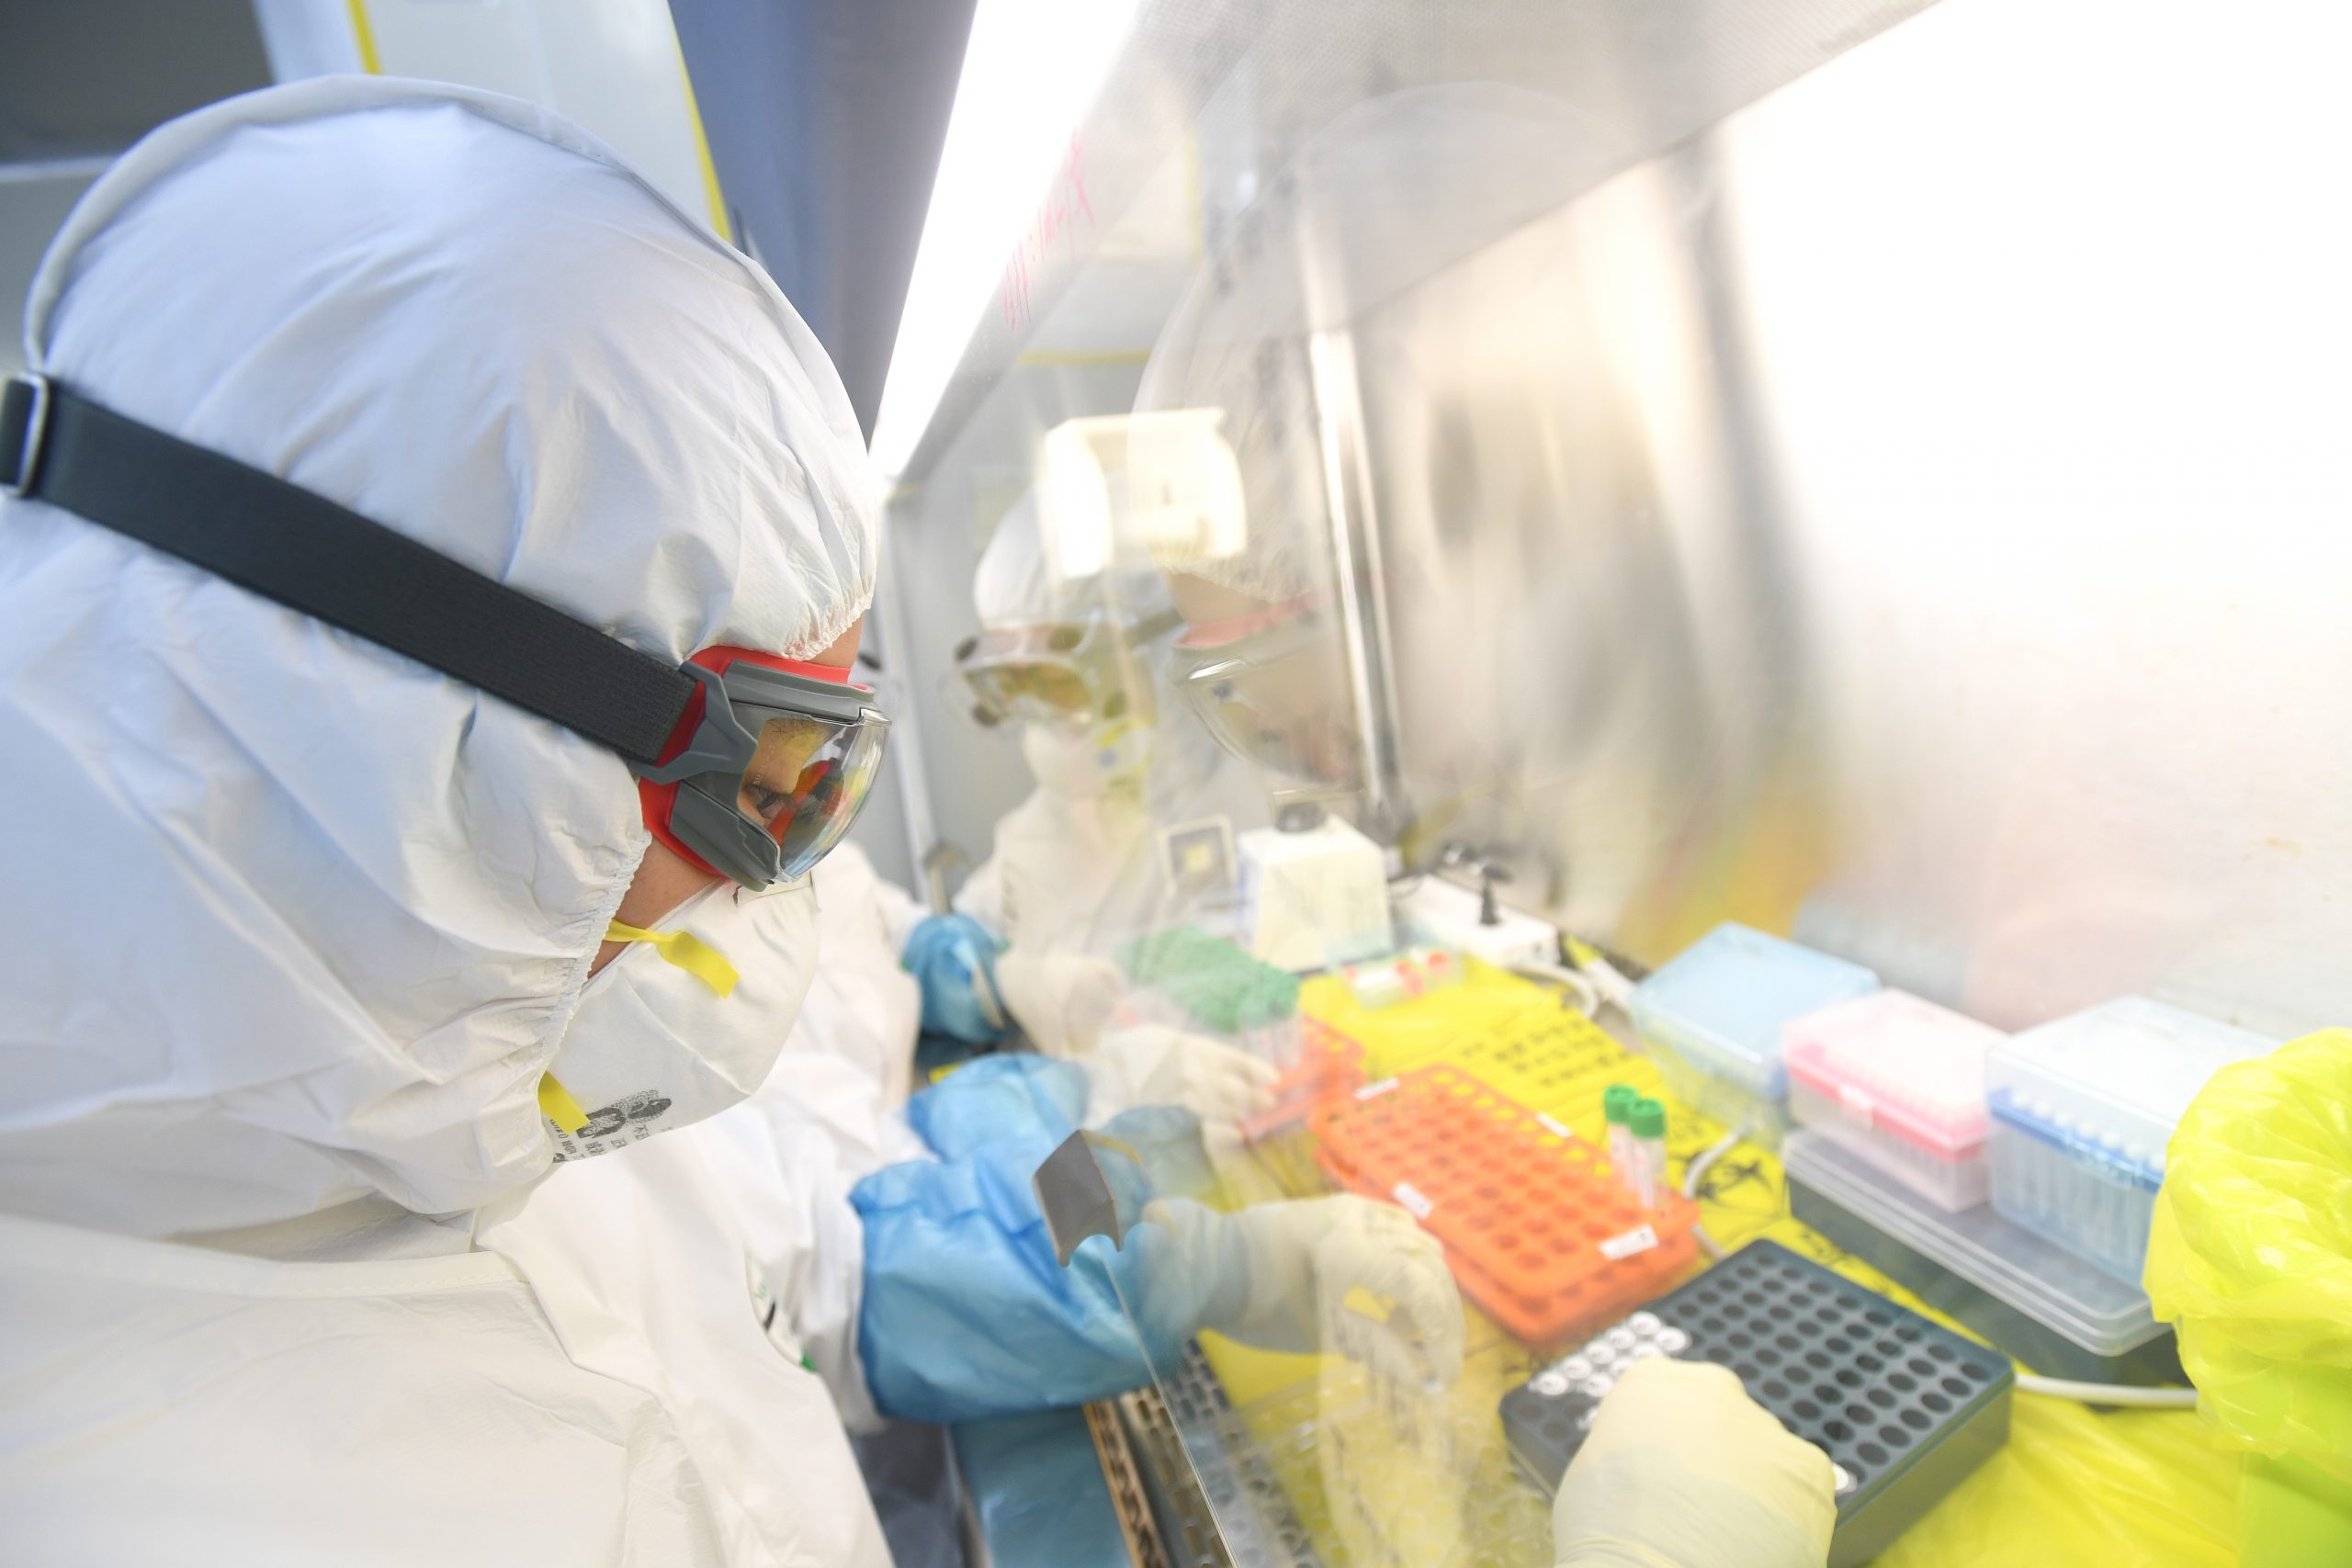 epa08199487 A staffer works in the pop-up Huoyan Laboratory specialized in the nucleic acid test on the novel coronavirus (2019-nCoV) in Wuhan, Hubei province, China, 06 February 2020 (issued 07 February 2020). The P2-level biosafety lab was built in five days, designed to perform 10,000 coronavirus tests per day to cope with the outbreak. The virus, which originated in the Chinese city of Wuhan, has so far killed at least 638 people and infected over 31,000 others, mostly in China.  EPA/SHEPHERD ZHOU CHINA OUT